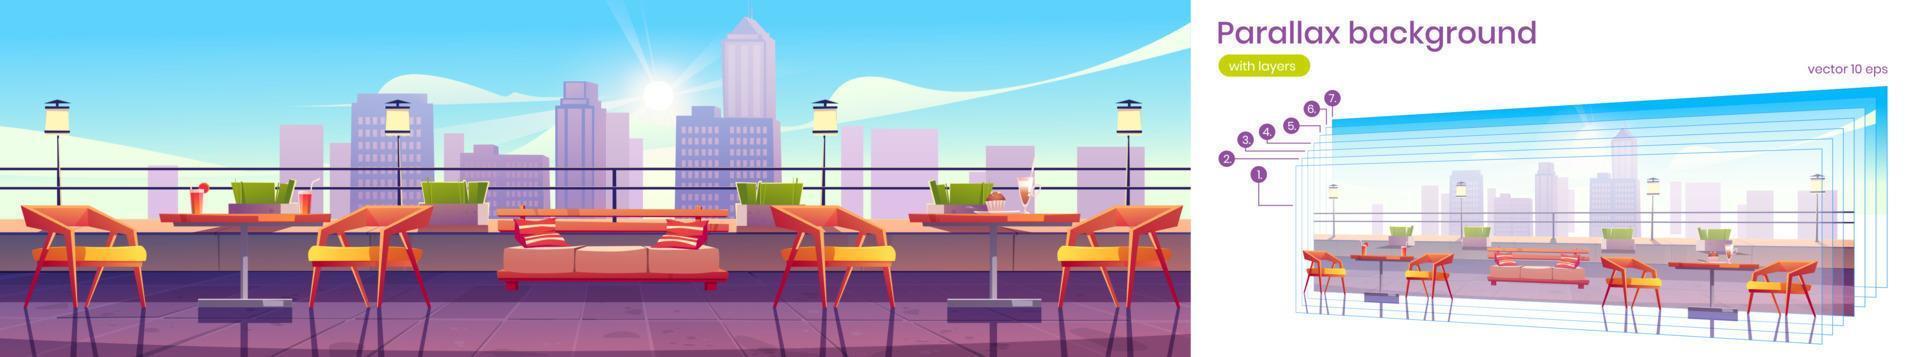 Parallax background with restaurant on rooftop vector